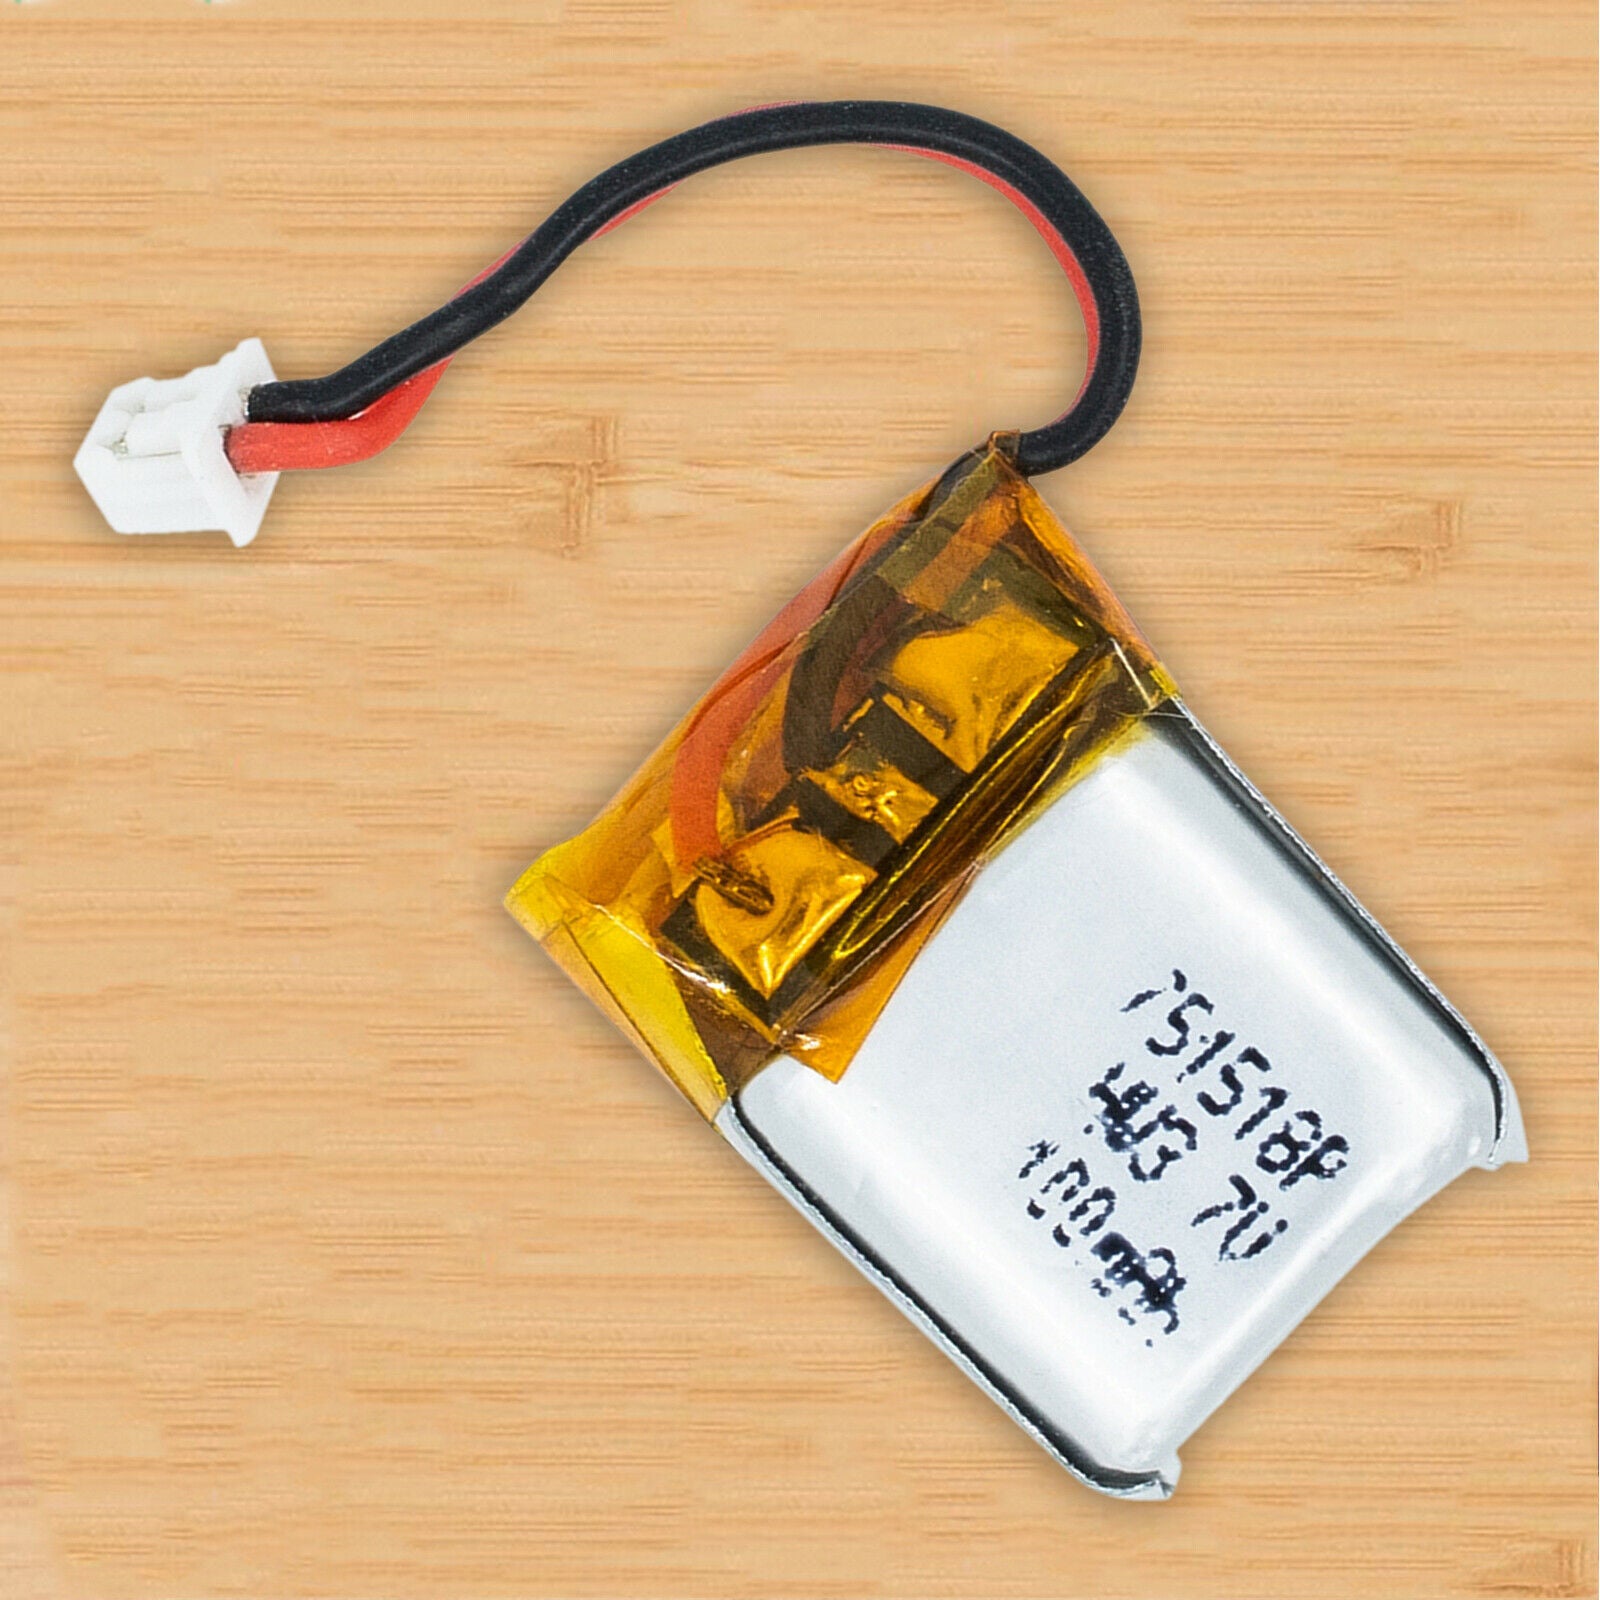 100mAh 3.7V Recharge Li-ion Lipo Battery Fit For 1:32 RC Remote Control Car